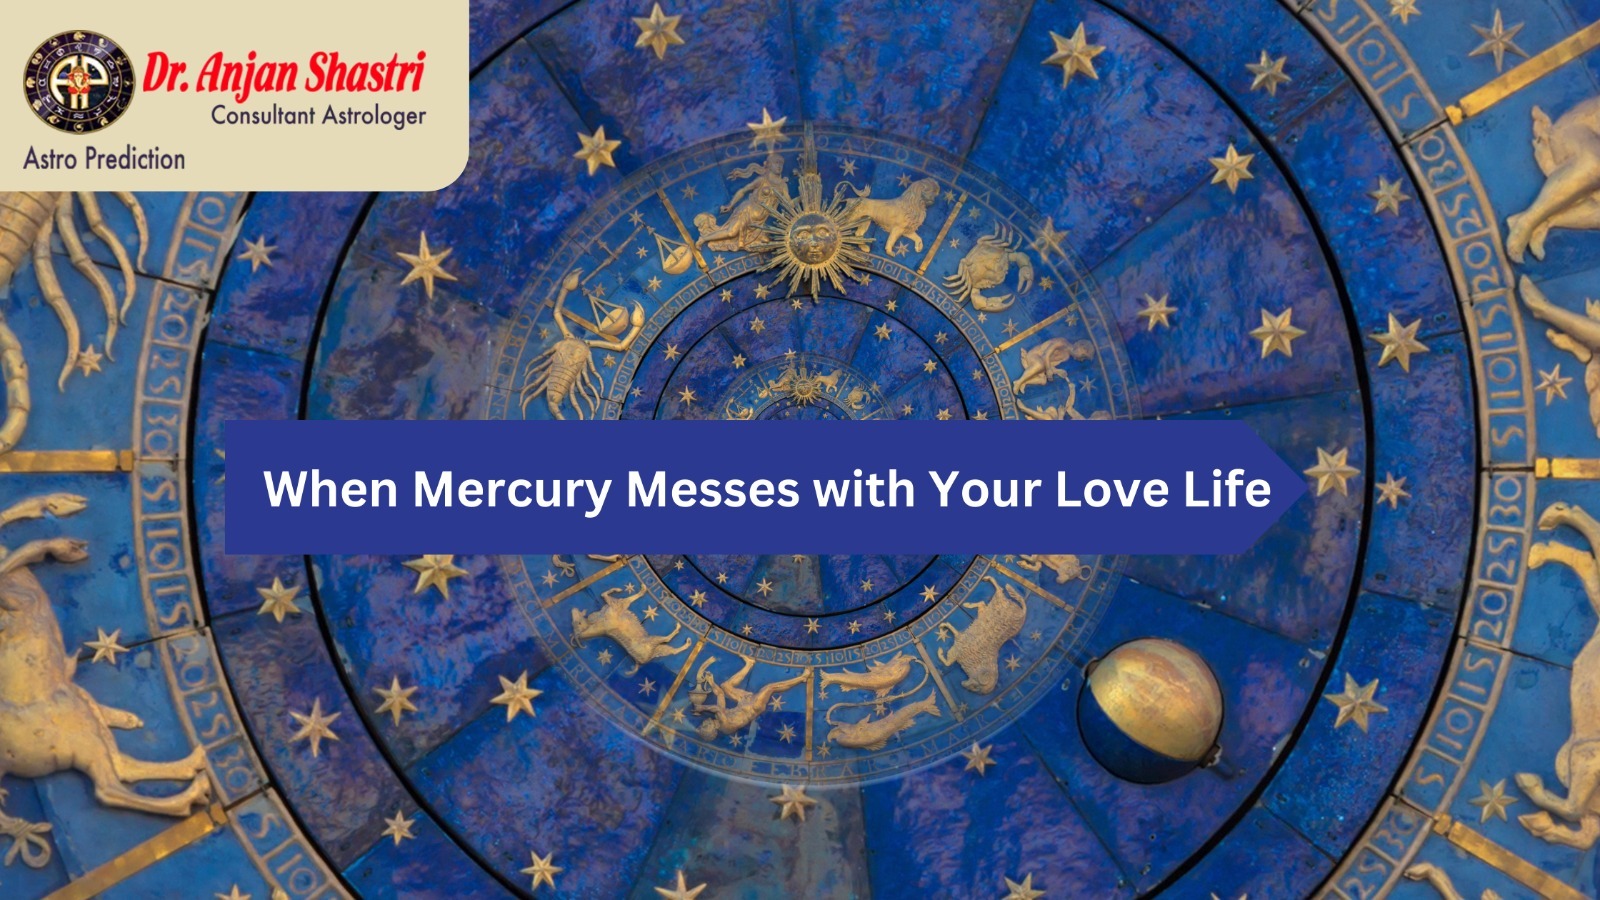 When Mercury Messes with Your Love Life